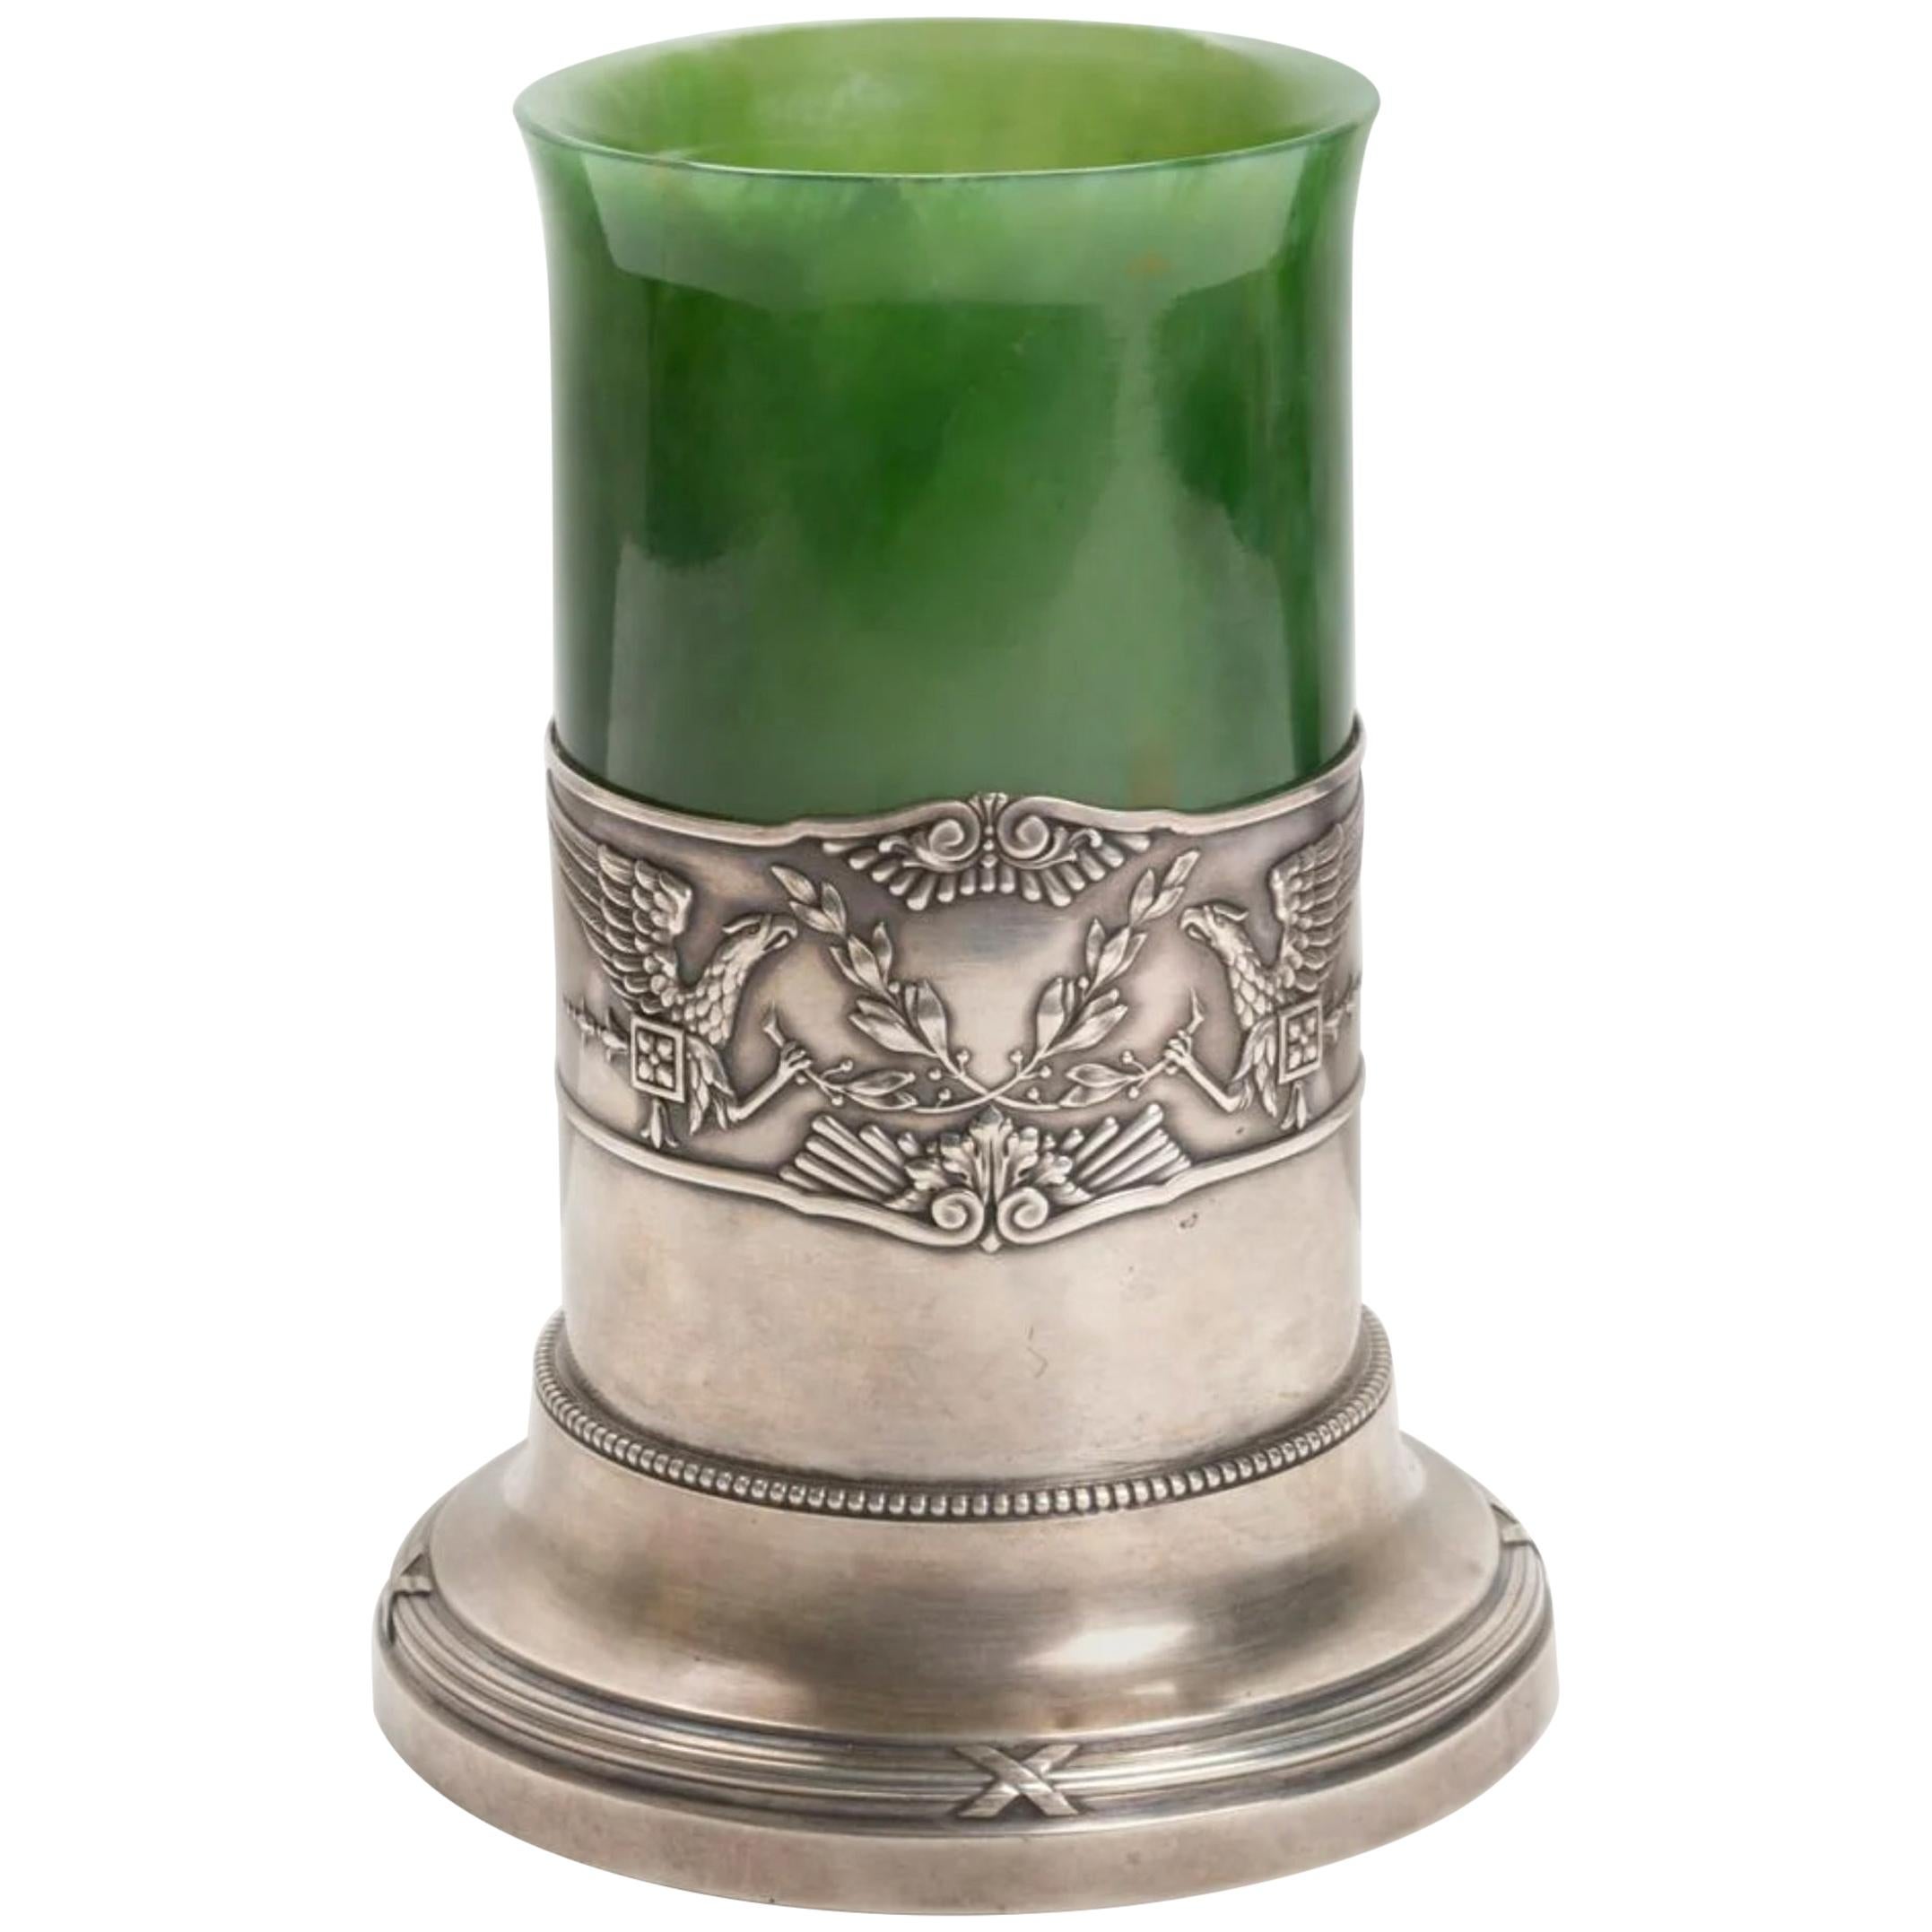 Fabergé in Jade Green Jewel Vase and Silver with Punch, 1890-1910